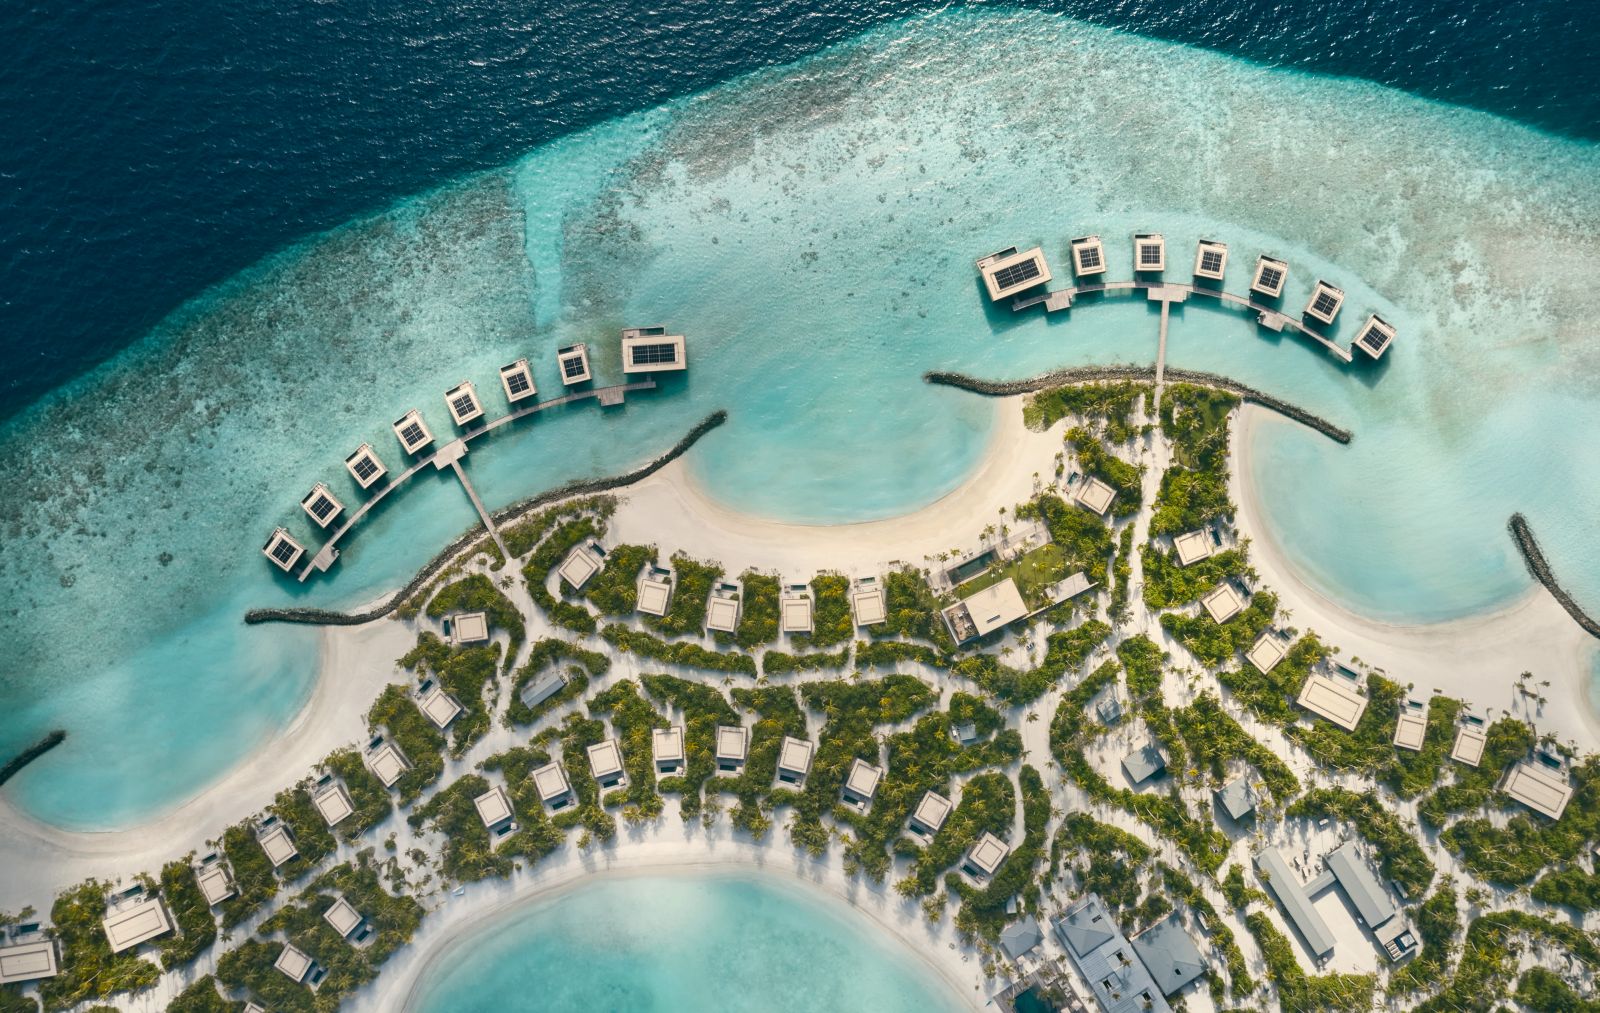 Aerial view of the island of luxury resort Patina in the Maldives